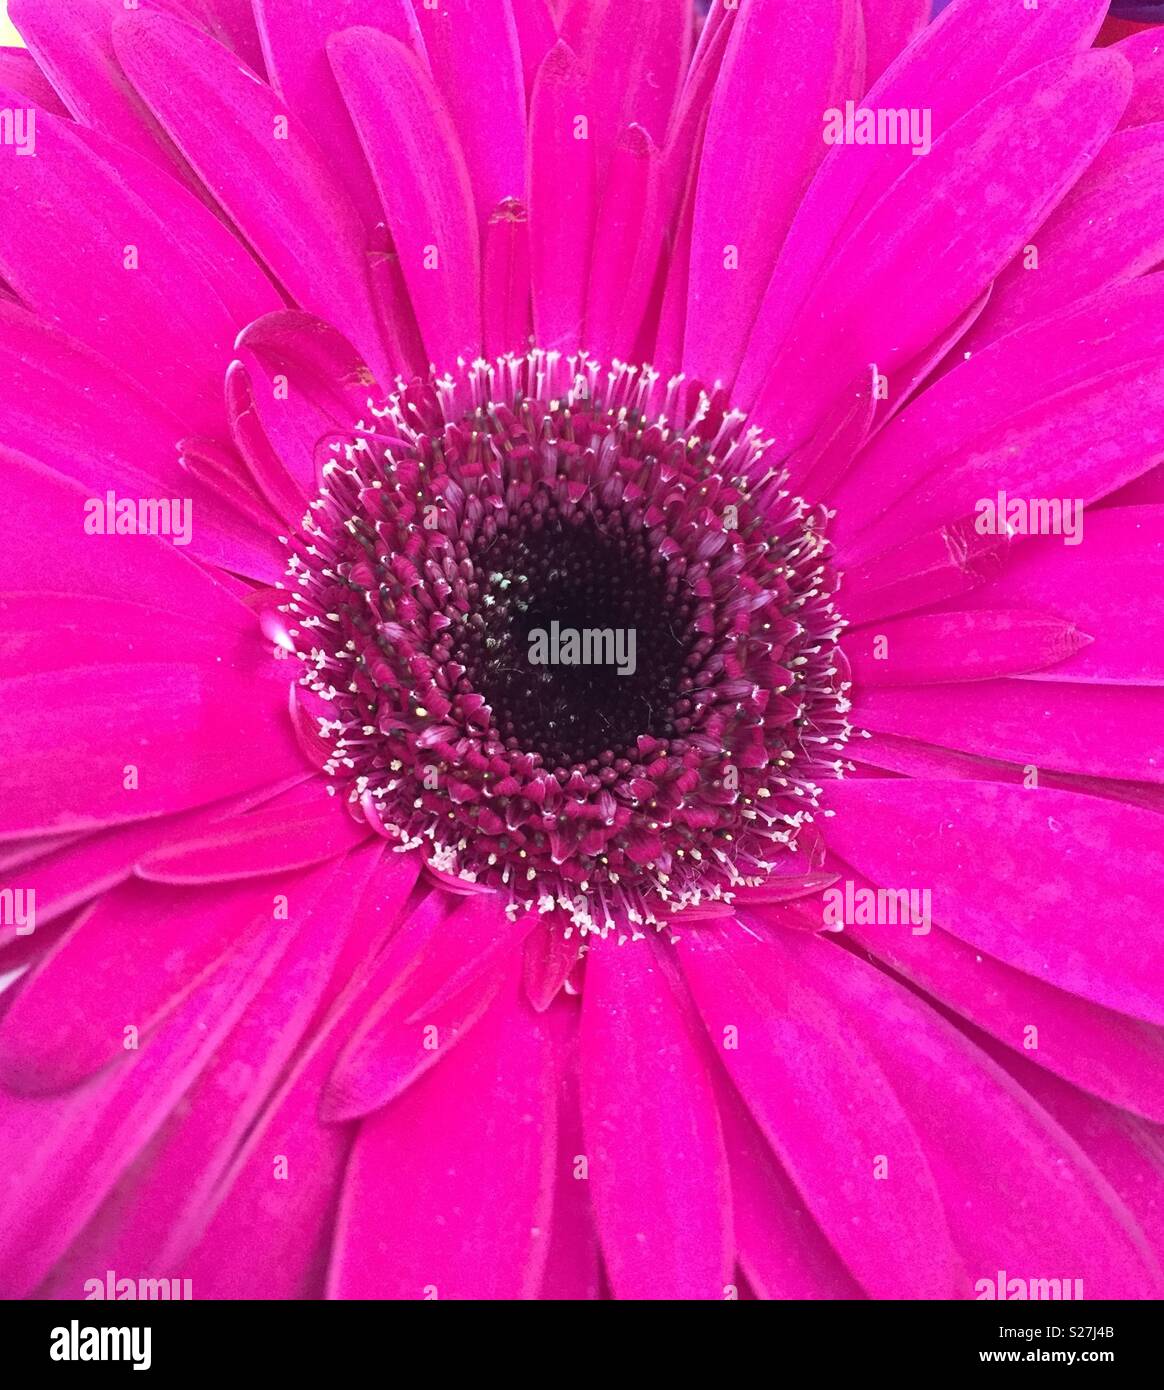 Bright pink or fuscia daisy flower. Flower fills whole image. No other object in photo. Dark centre of the real flower Stock Photo